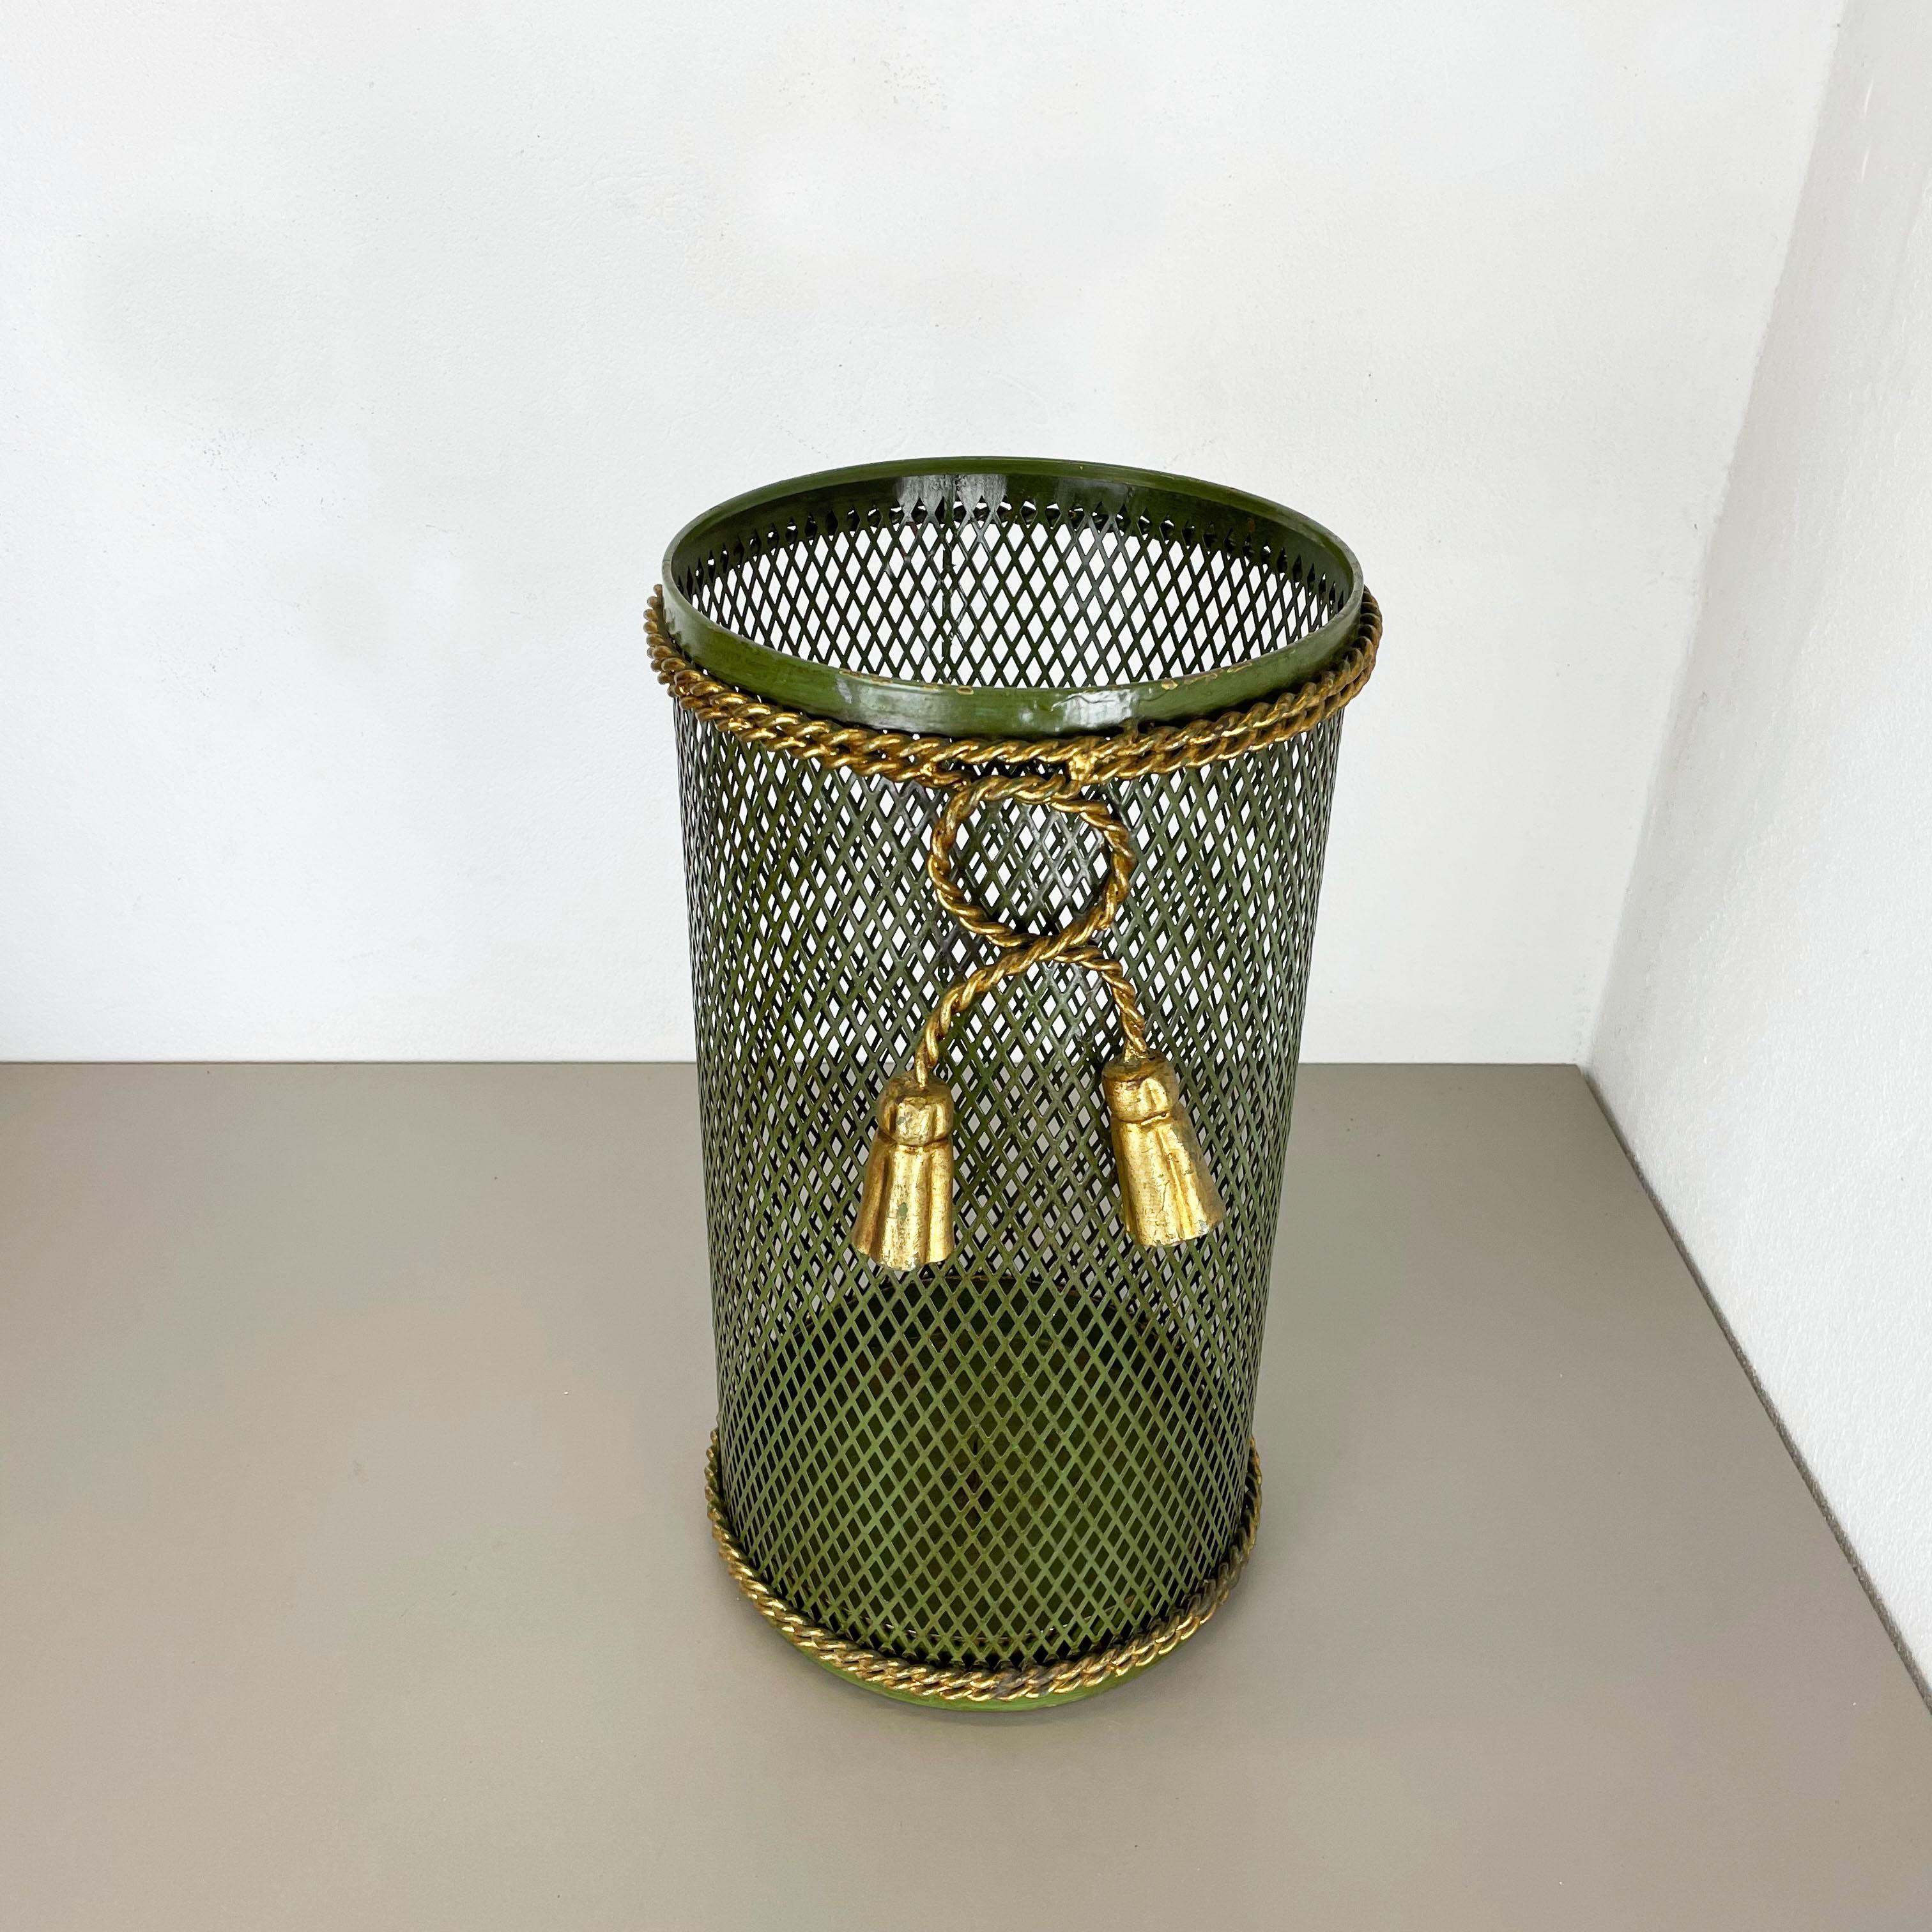 Bauhaus Hollywood Regency Gilded Metal Umbrella Stand by Li Puma, Firenze, Italy, 1950s For Sale